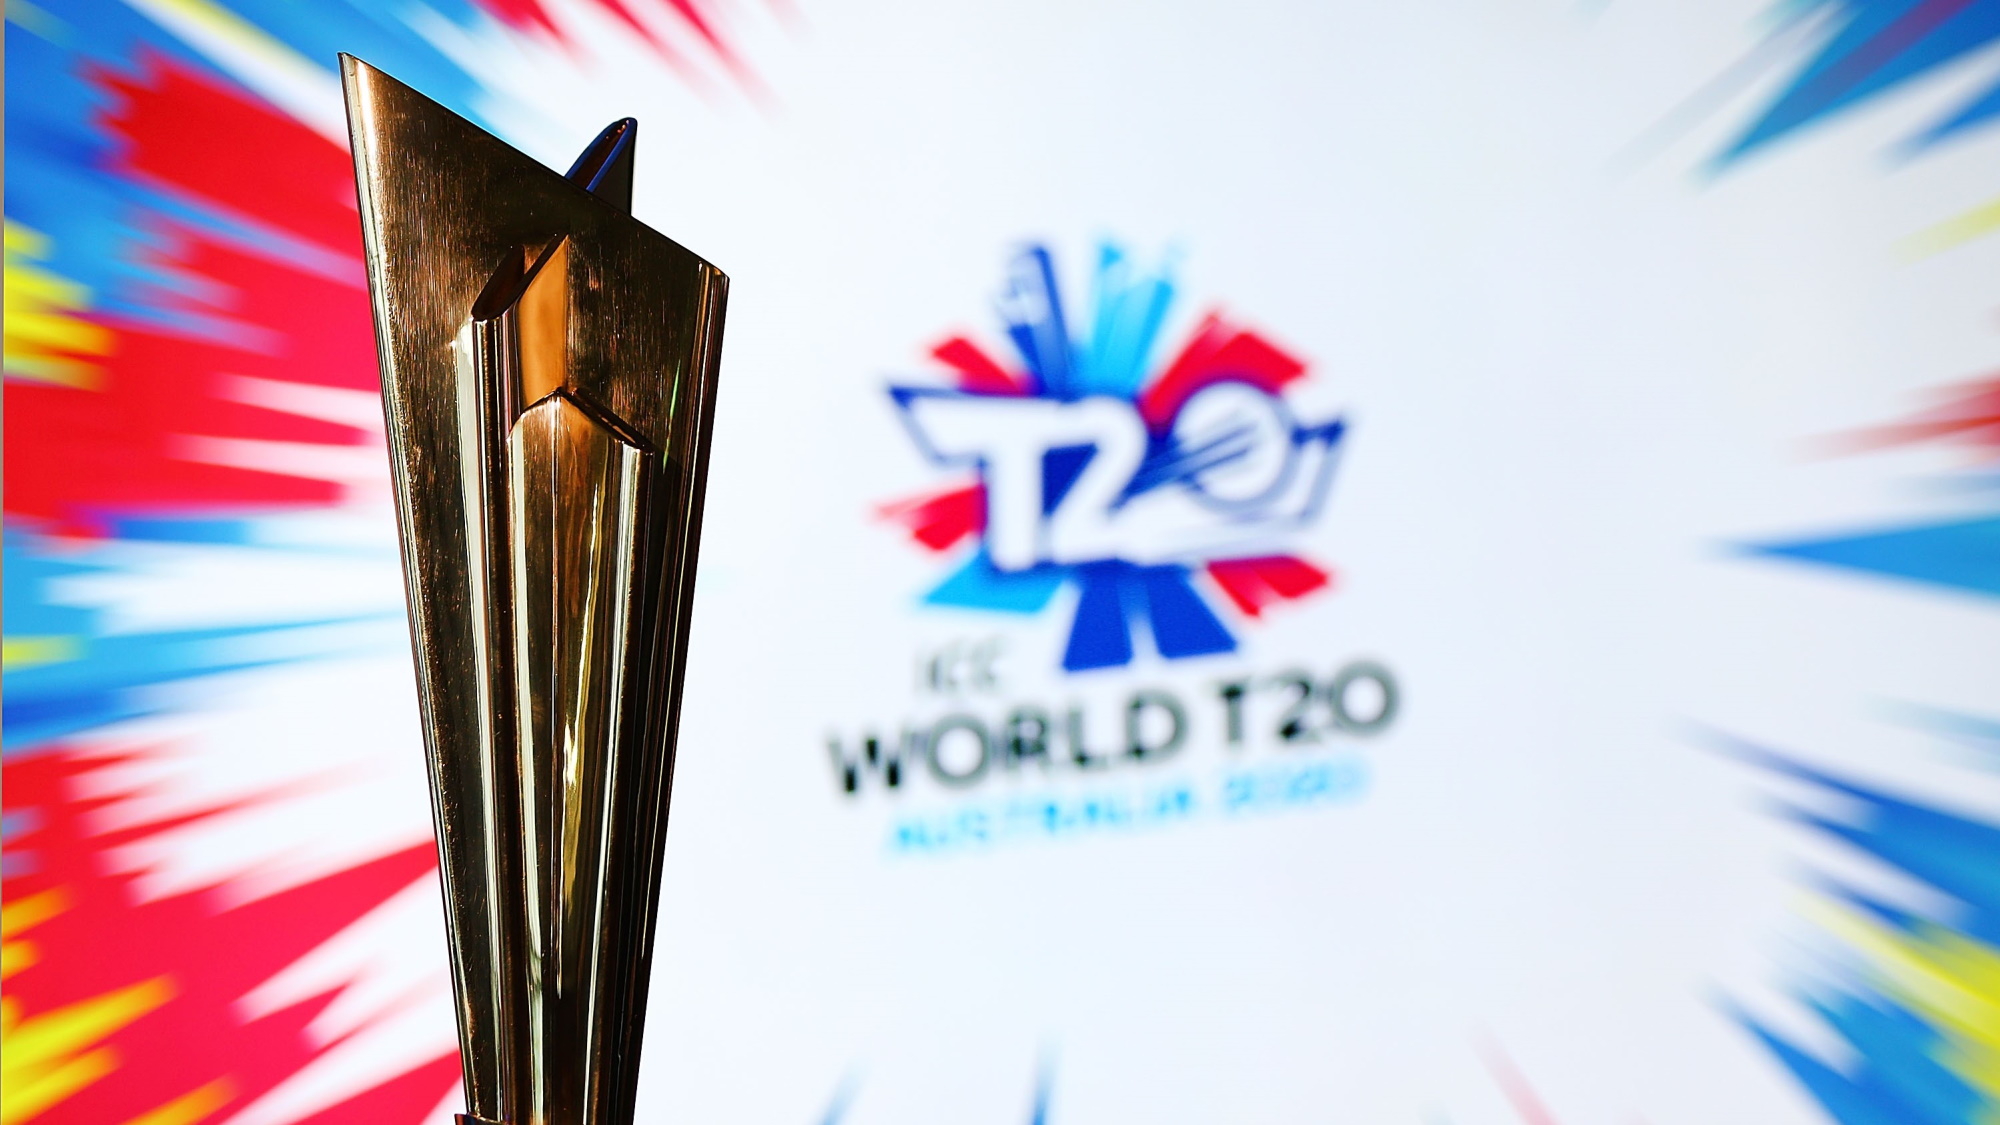 The ICC T20 World Cup Trophy